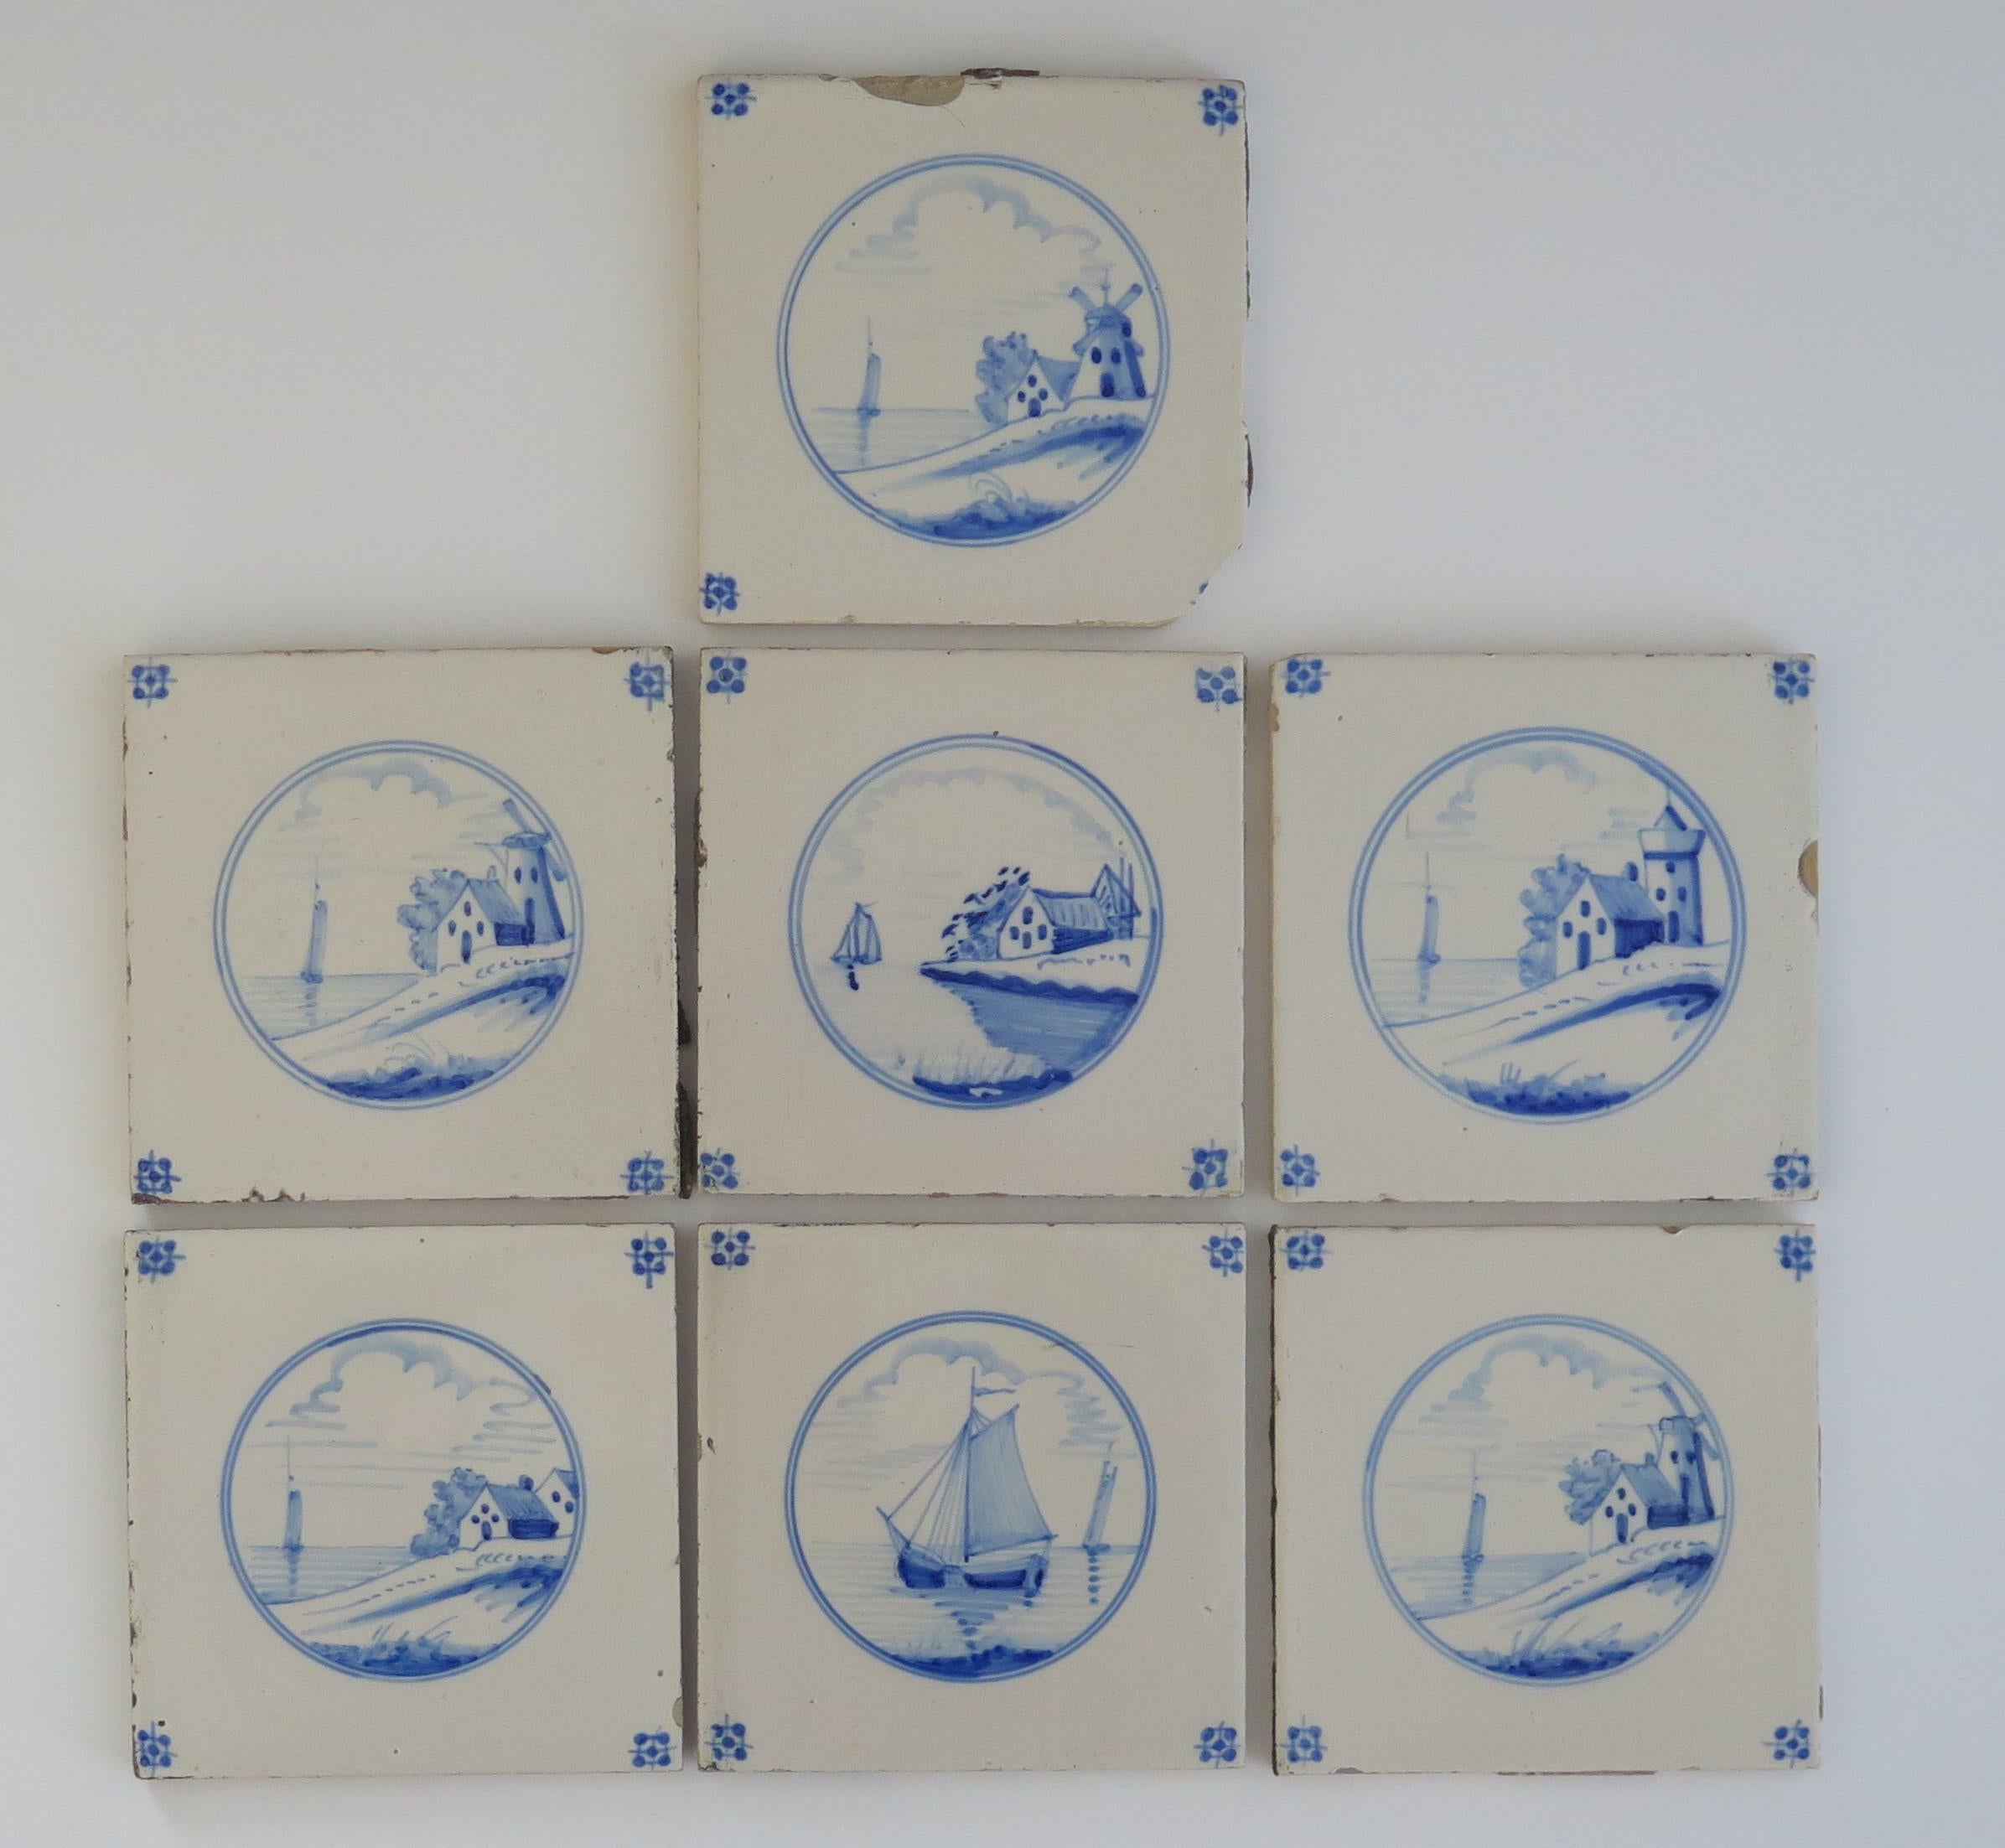 These are Seven Delft wall tiles, all with hand painted blue and white waterside landscape scenes, made in the Netherlands during the 19th century. 

The tiles are ceramic, made of earthenware and nominally about 5.2 inches square.

The set of